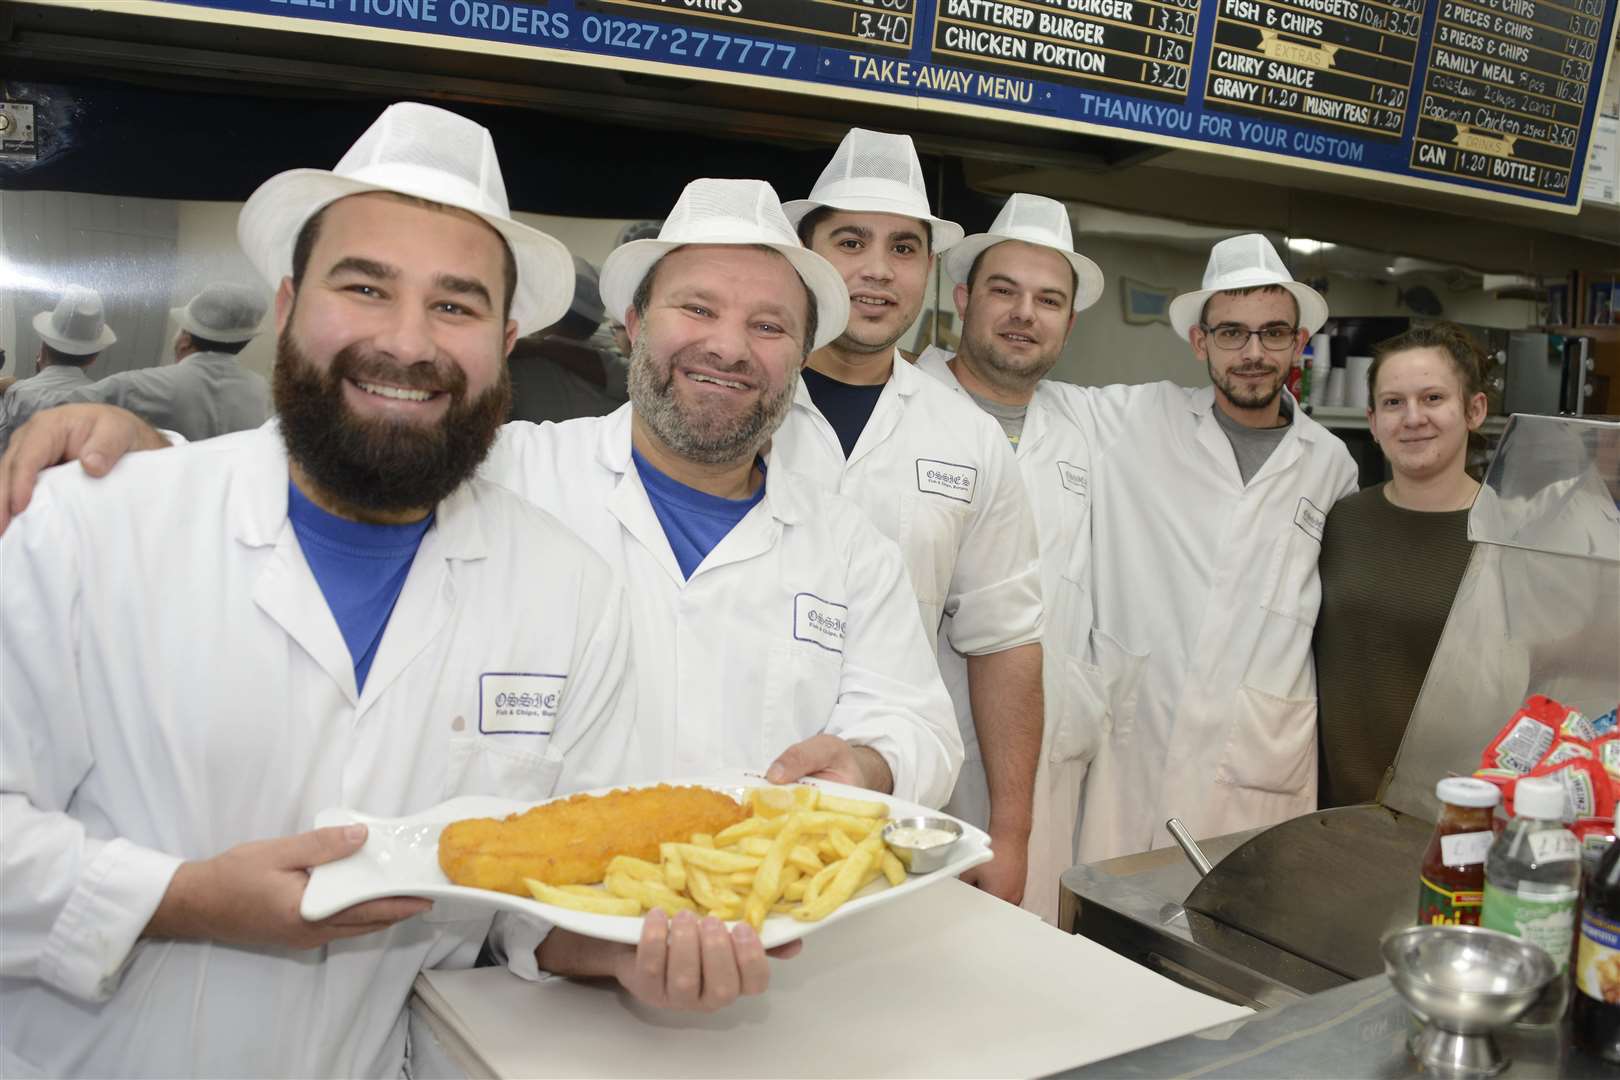 Staff at Ossie's Fish Bar, which took first plaice in our poll